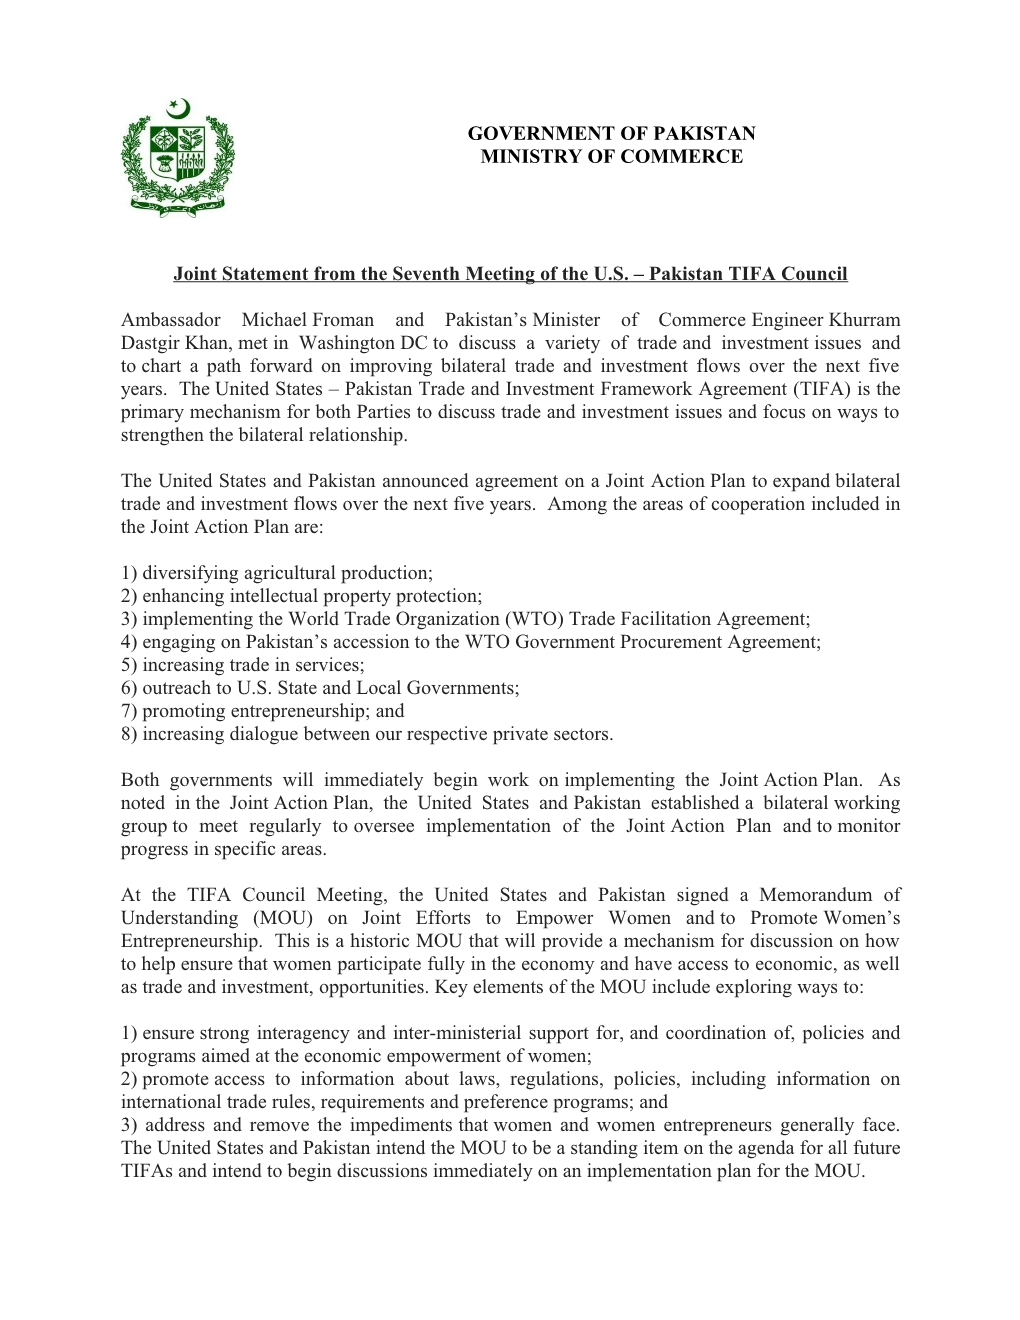 Joint Statement from the Seventh Meeting of the U.S. Pakistan TIFA Council